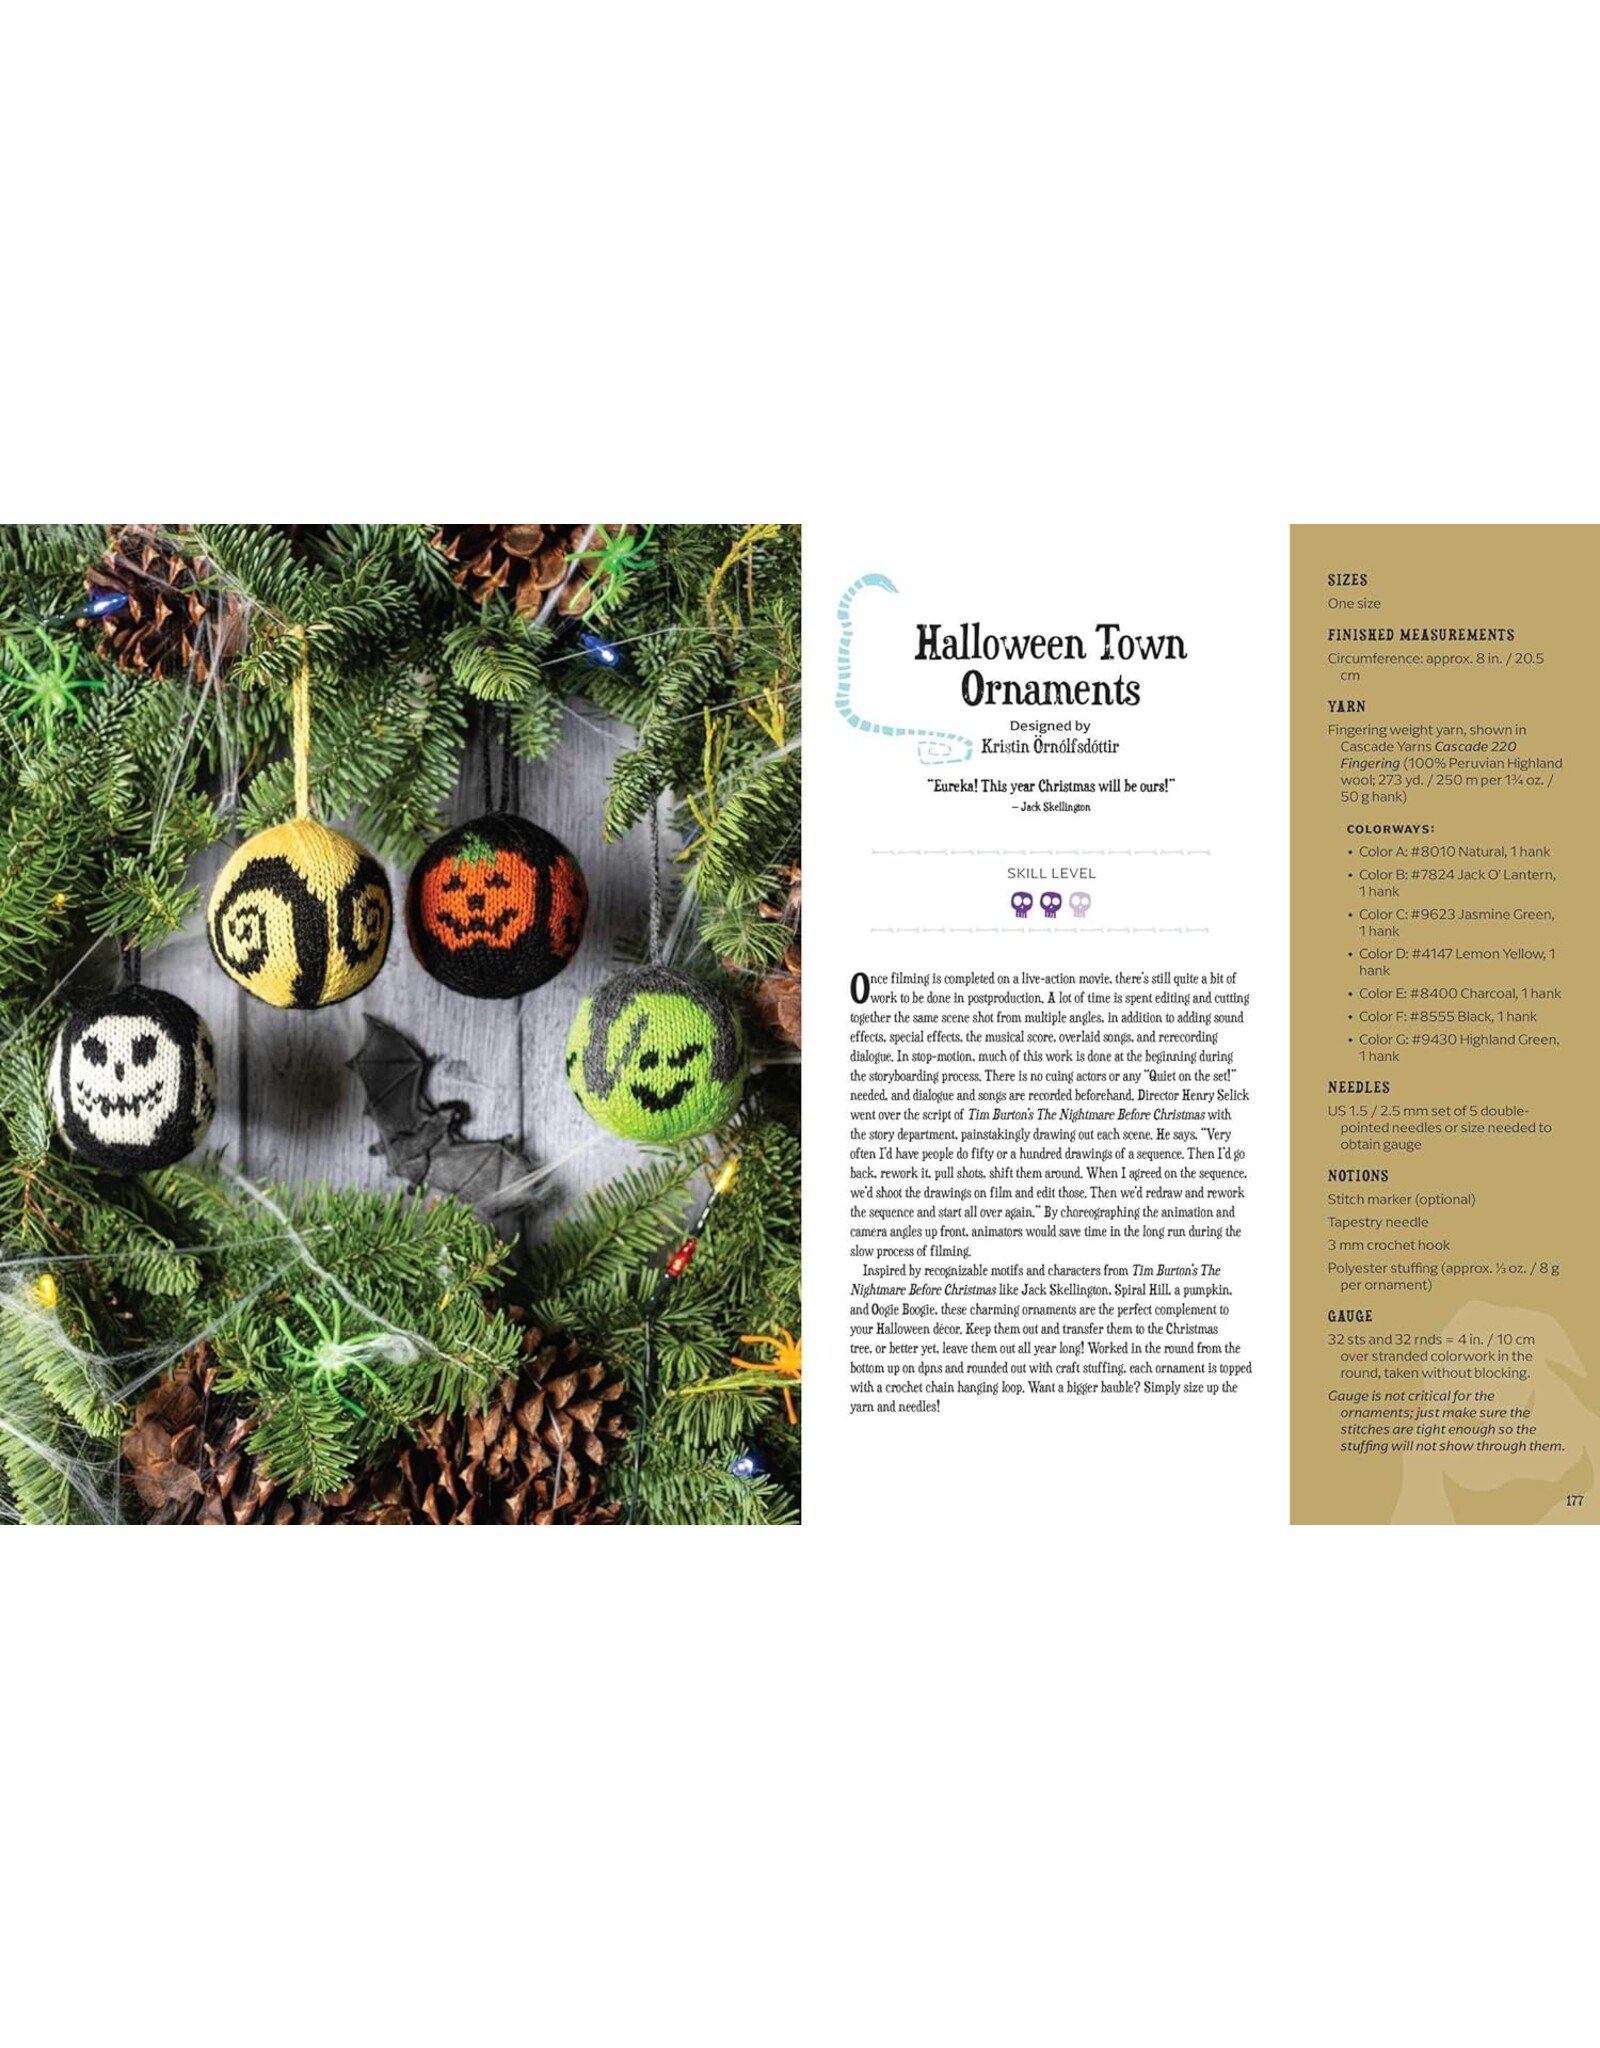 Tanis Gray The Disney Tim Burton's Nightmare Before Christmas: The Official Knitting Guide to Halloween Town and Christmas Town